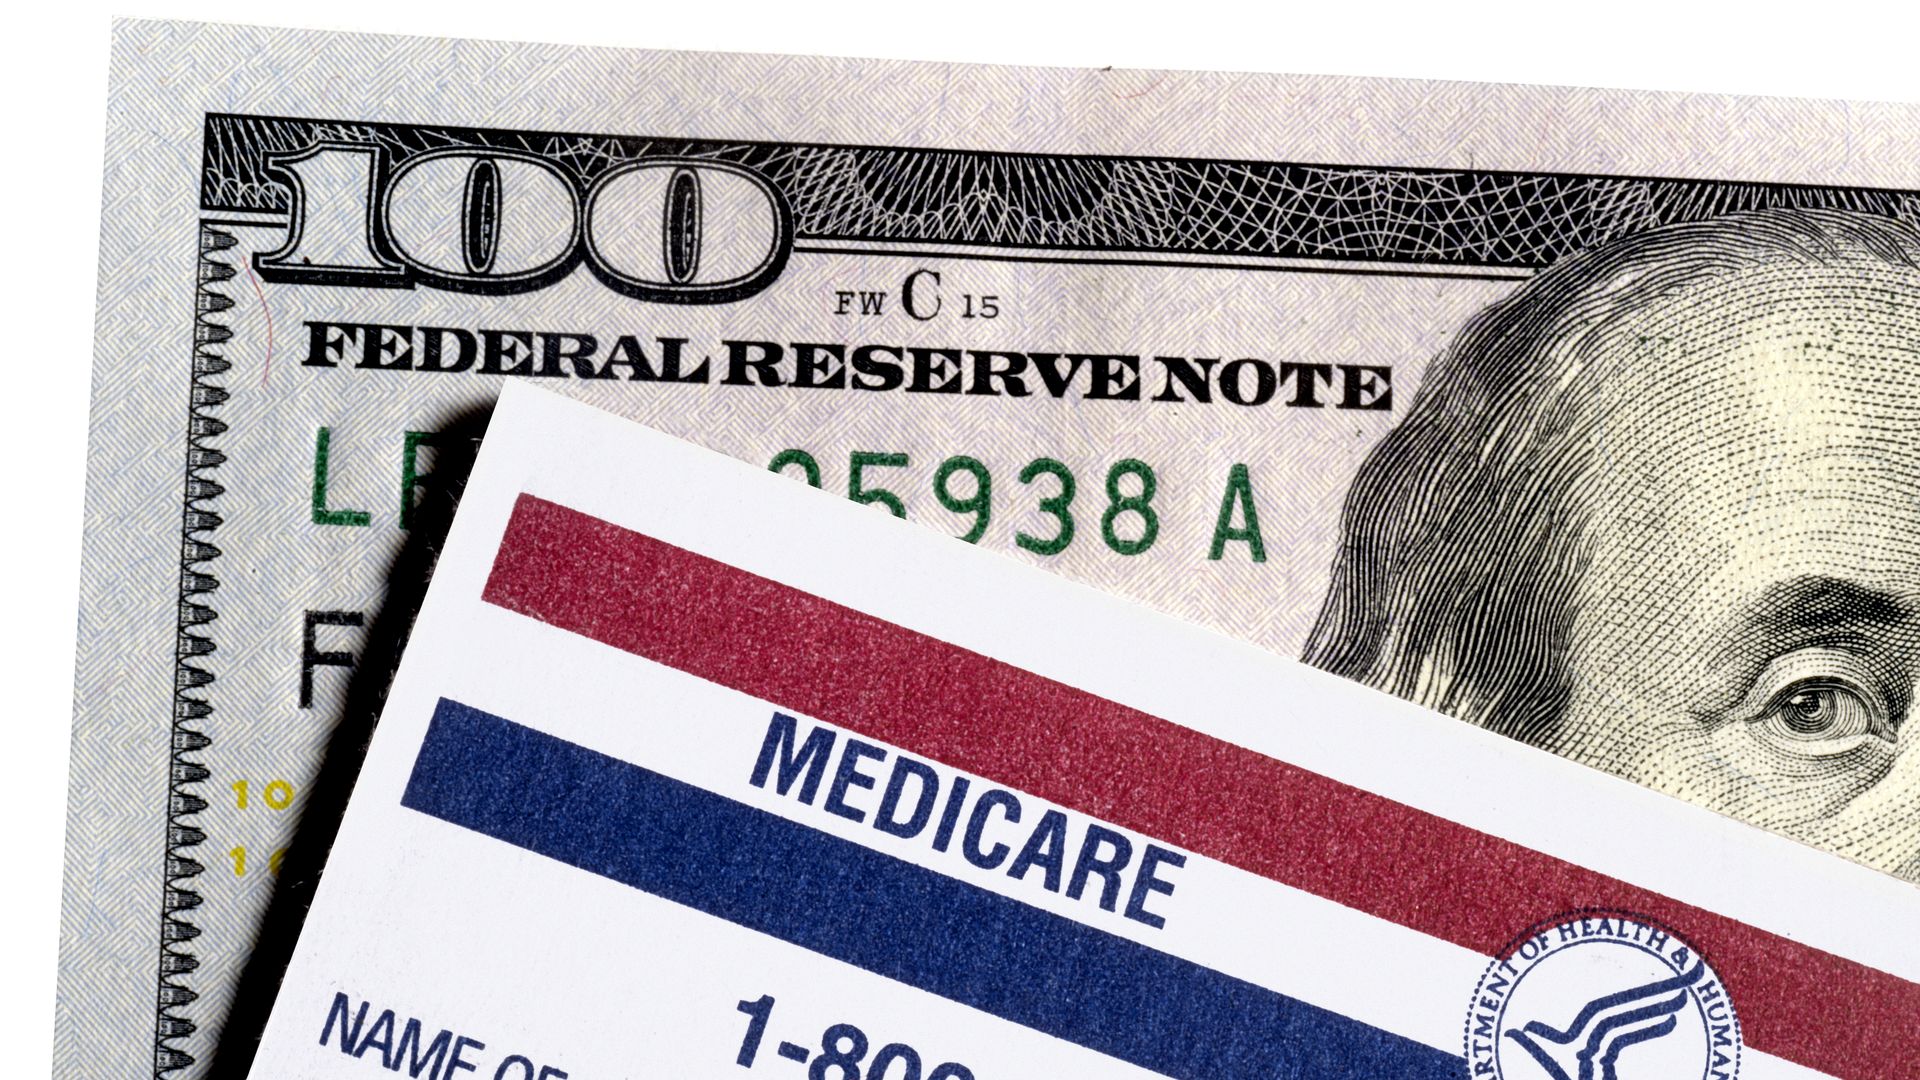 Medicare card in front of a hundred dollar bill